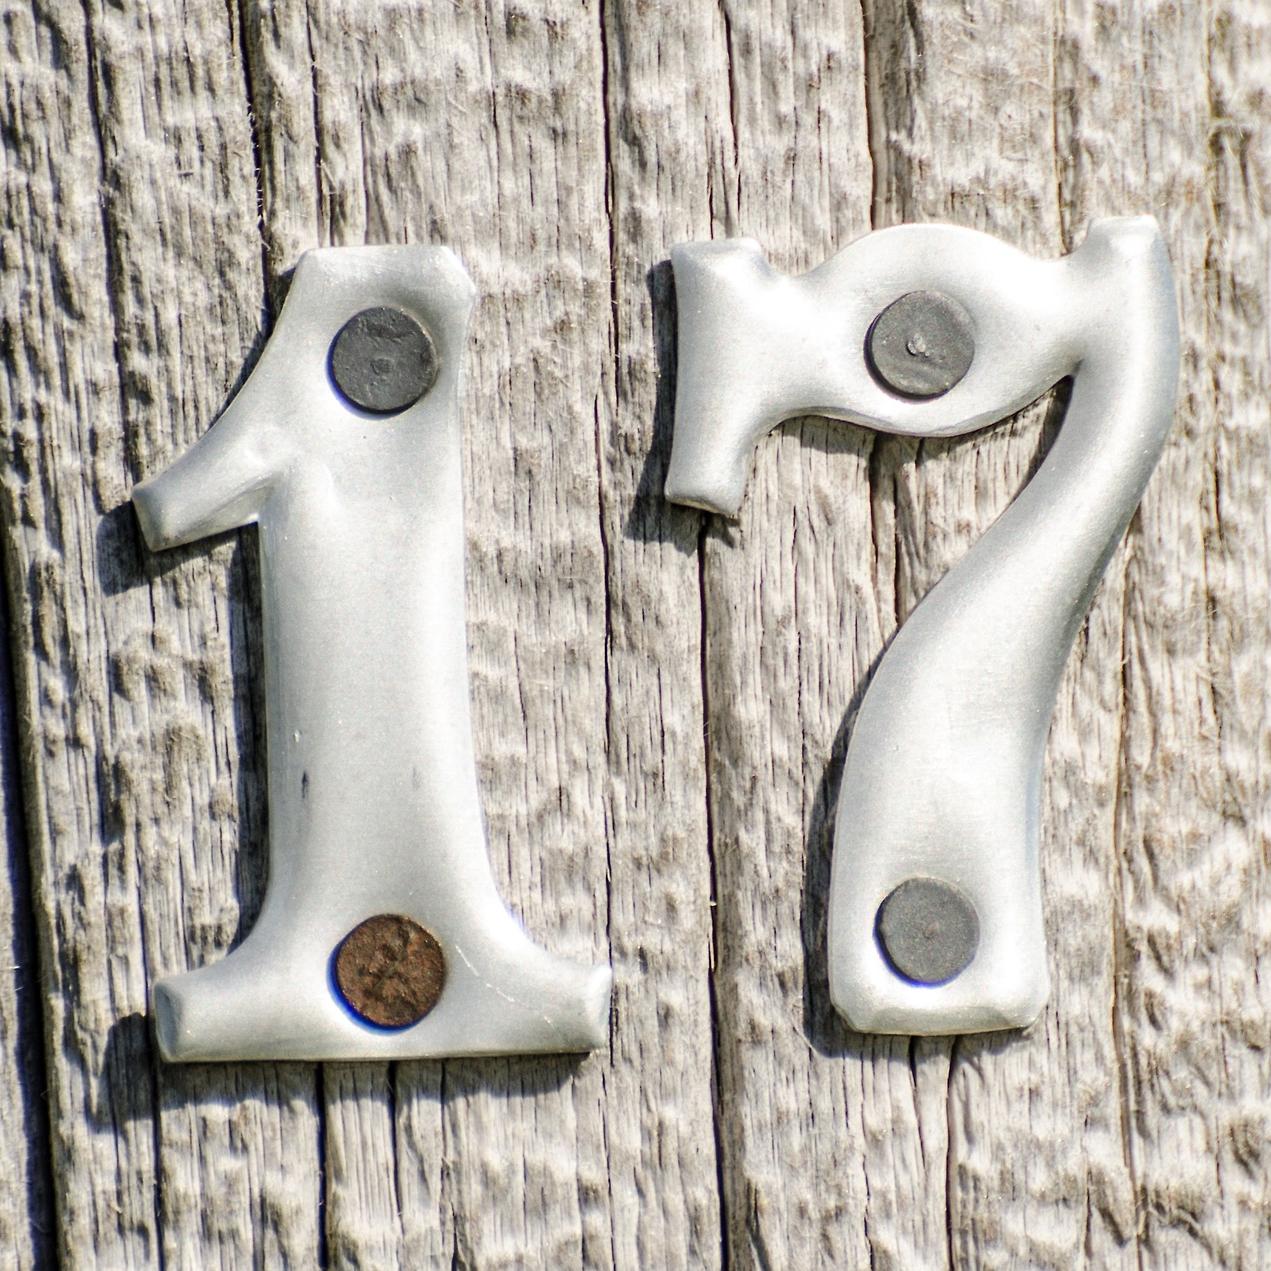 metallic number seventeen nailed to a wood surface